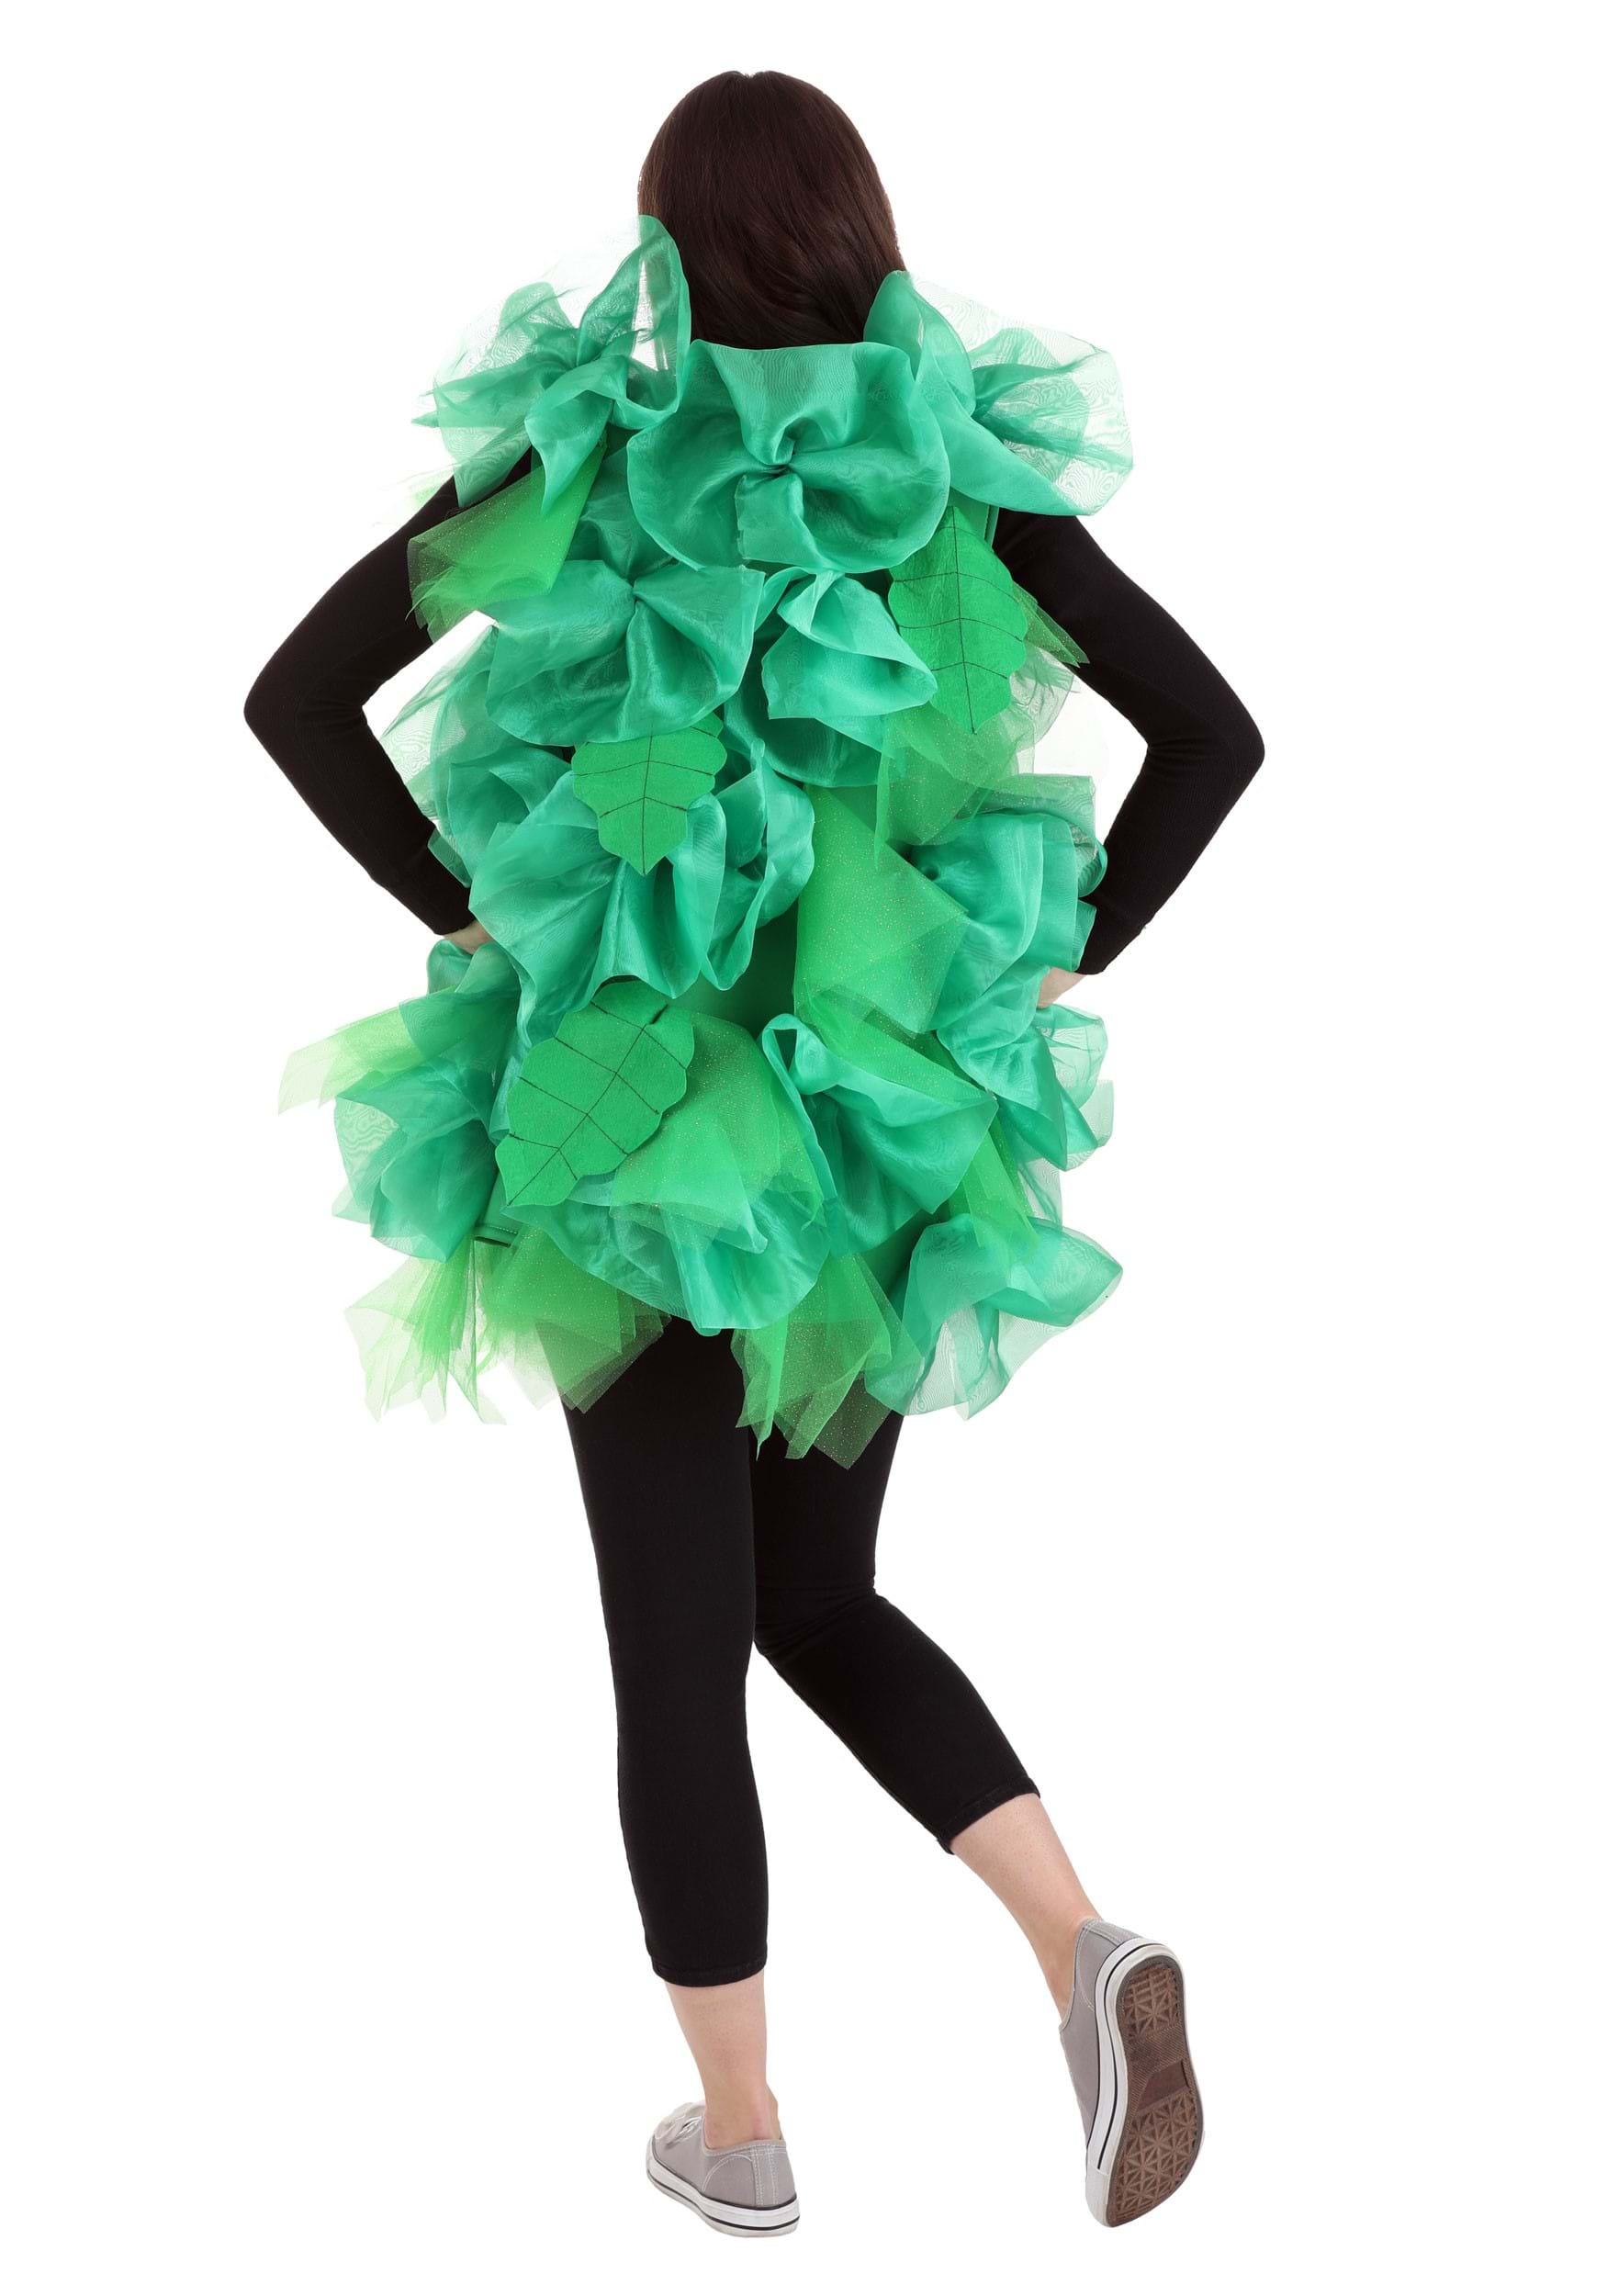 Salad Costume For Adult's